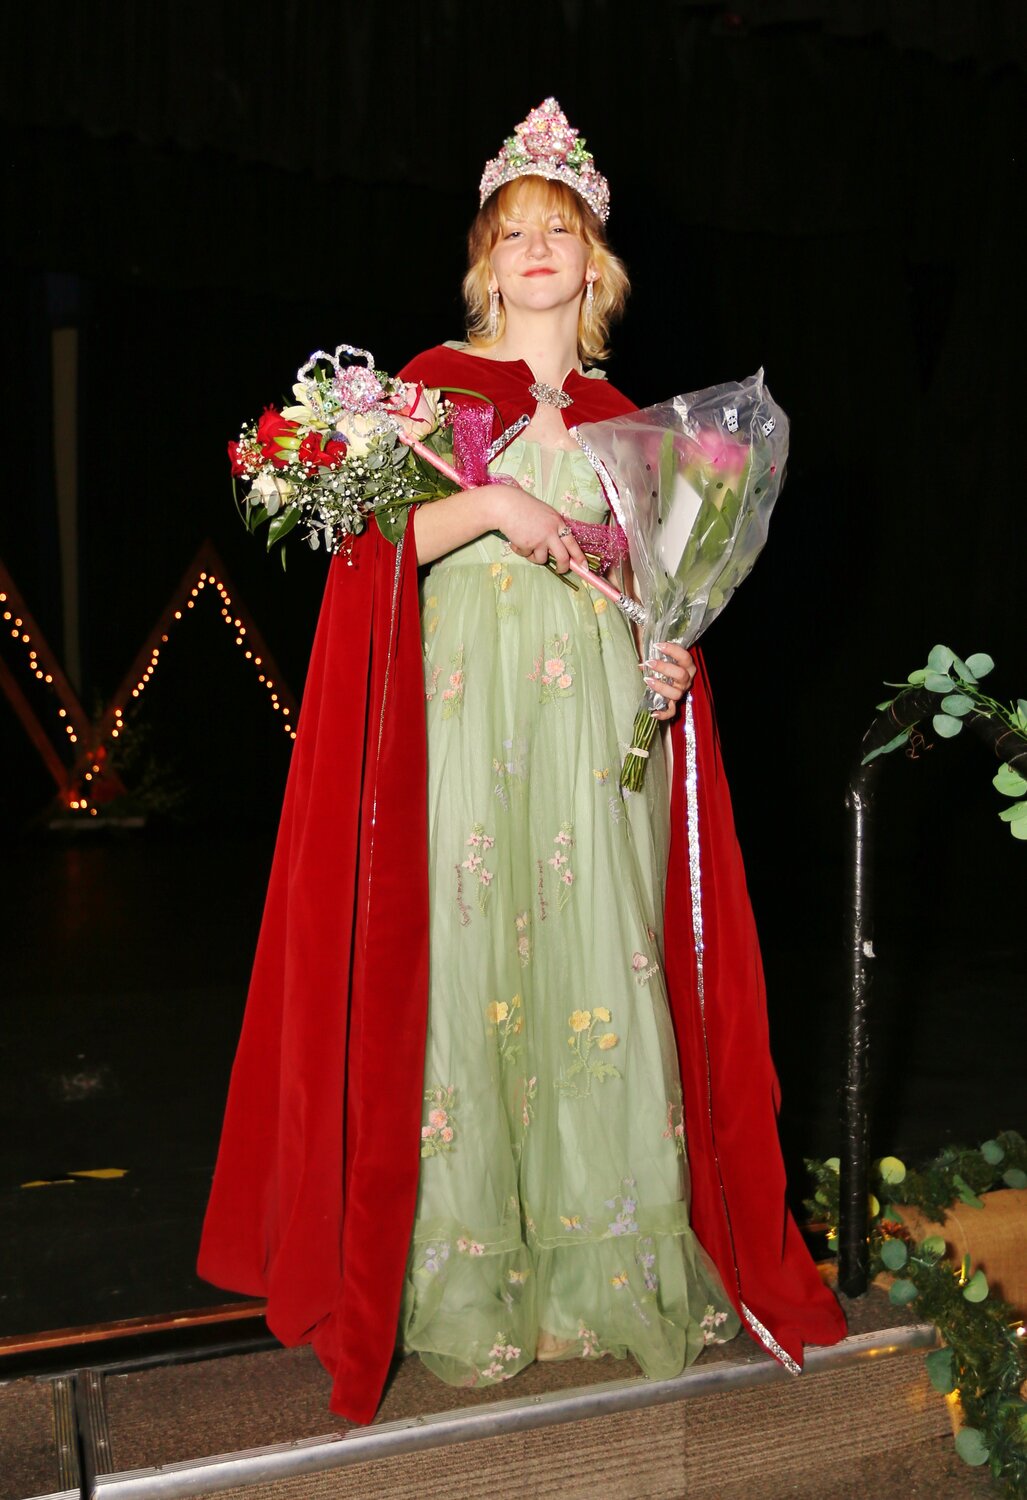 Queen Isabelle Harris will reign over the 2024 Manson Apple Blossom Festival along with her princesses.